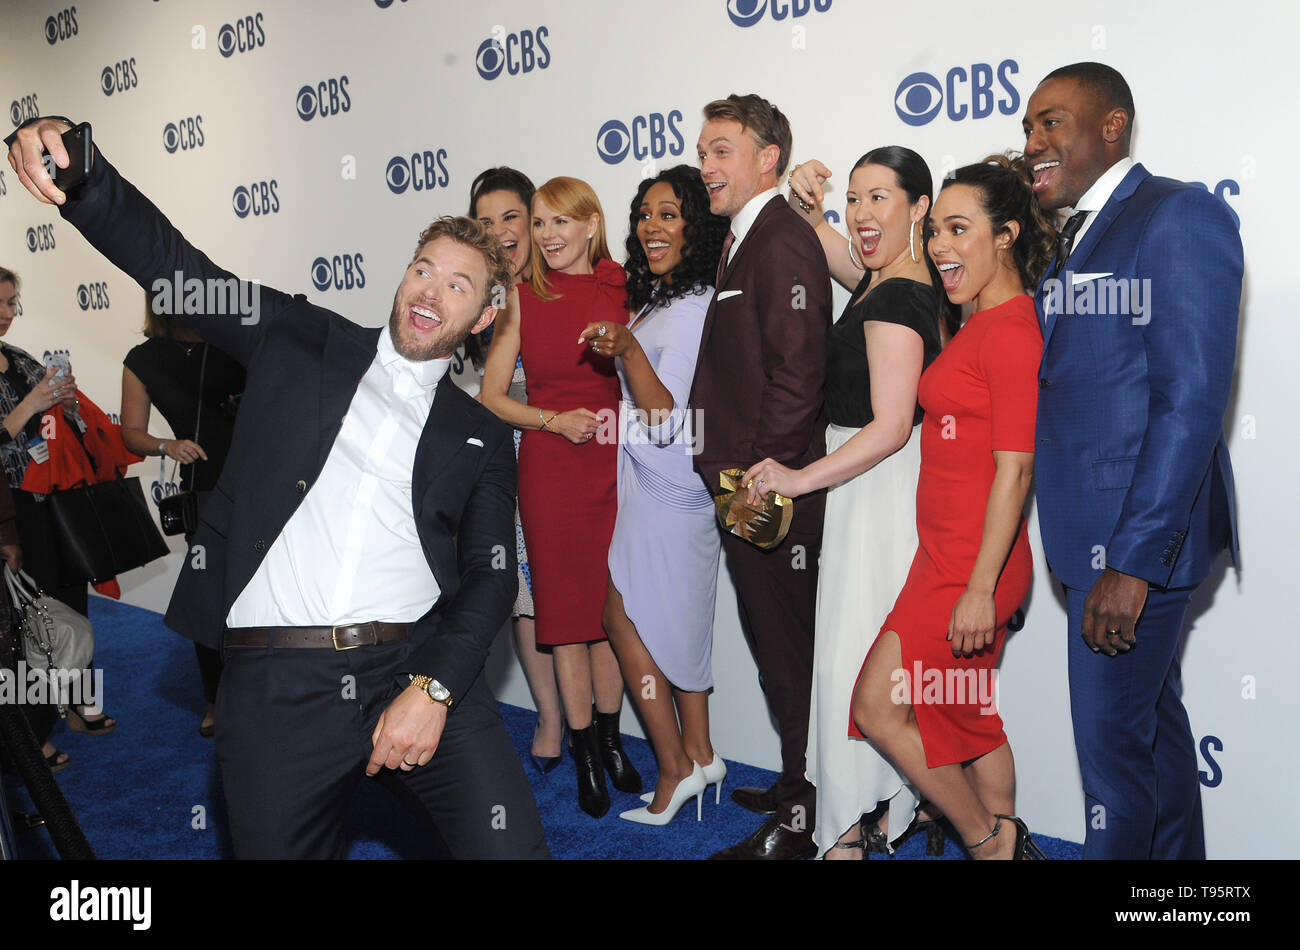 New York, NY, USA. 15th May, 2019. Kellan Lutz photo bombs Lindsay Mendez, Marg Helgenberger, Simone Missick, Wilson Bethel, Ruthie Ann Miles, Jessica Camacho and J Alex Brinson from ALL RISE attends the 2019 CBS Upfront presentation at the Plaza on May 15, 2019 in New York City. Credit: John Palmer/Media Punch/Alamy Live News Stock Photo